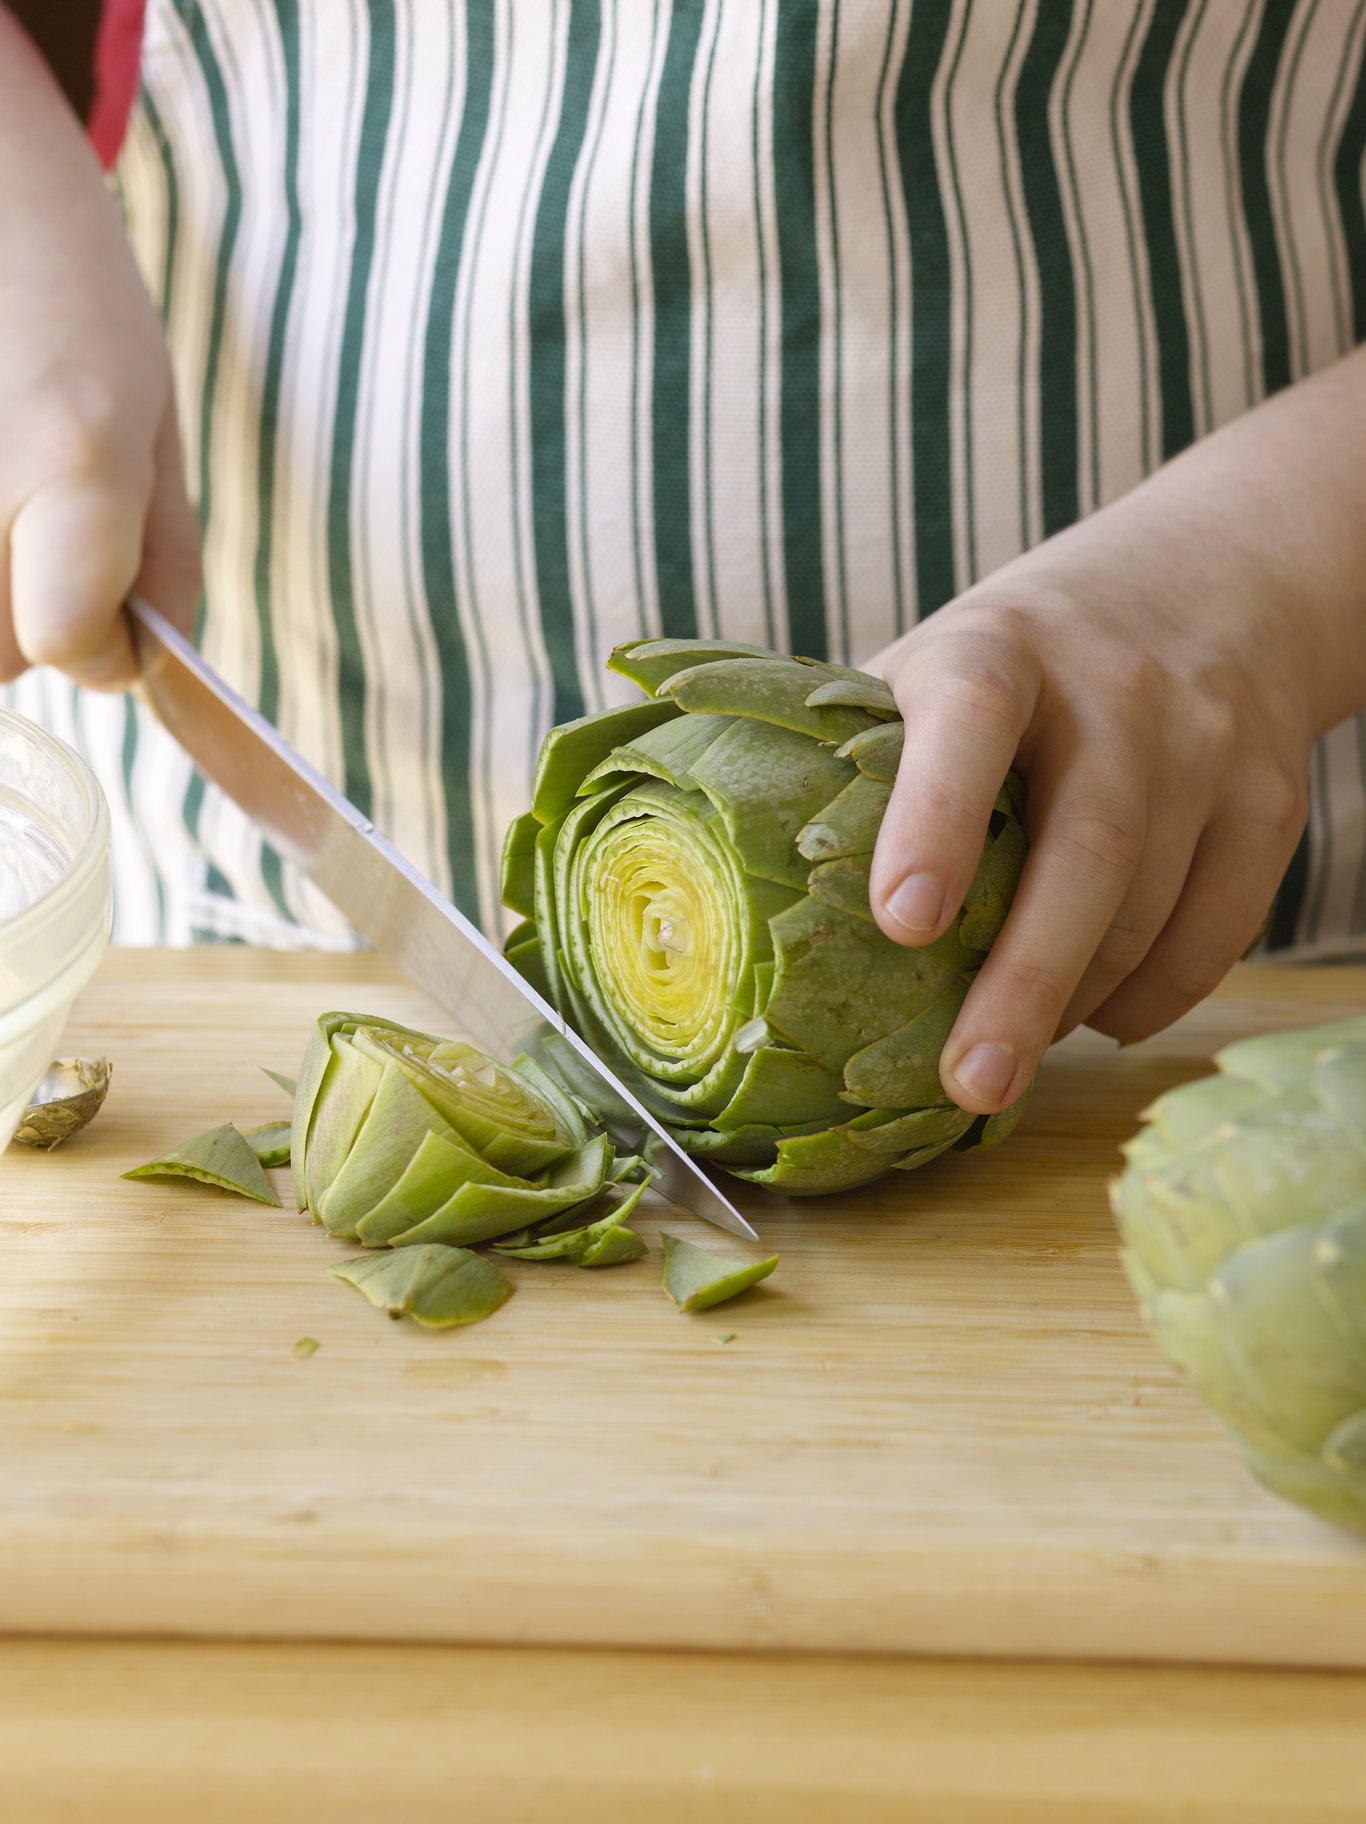 Remove the top and excess stem of the artichoke.